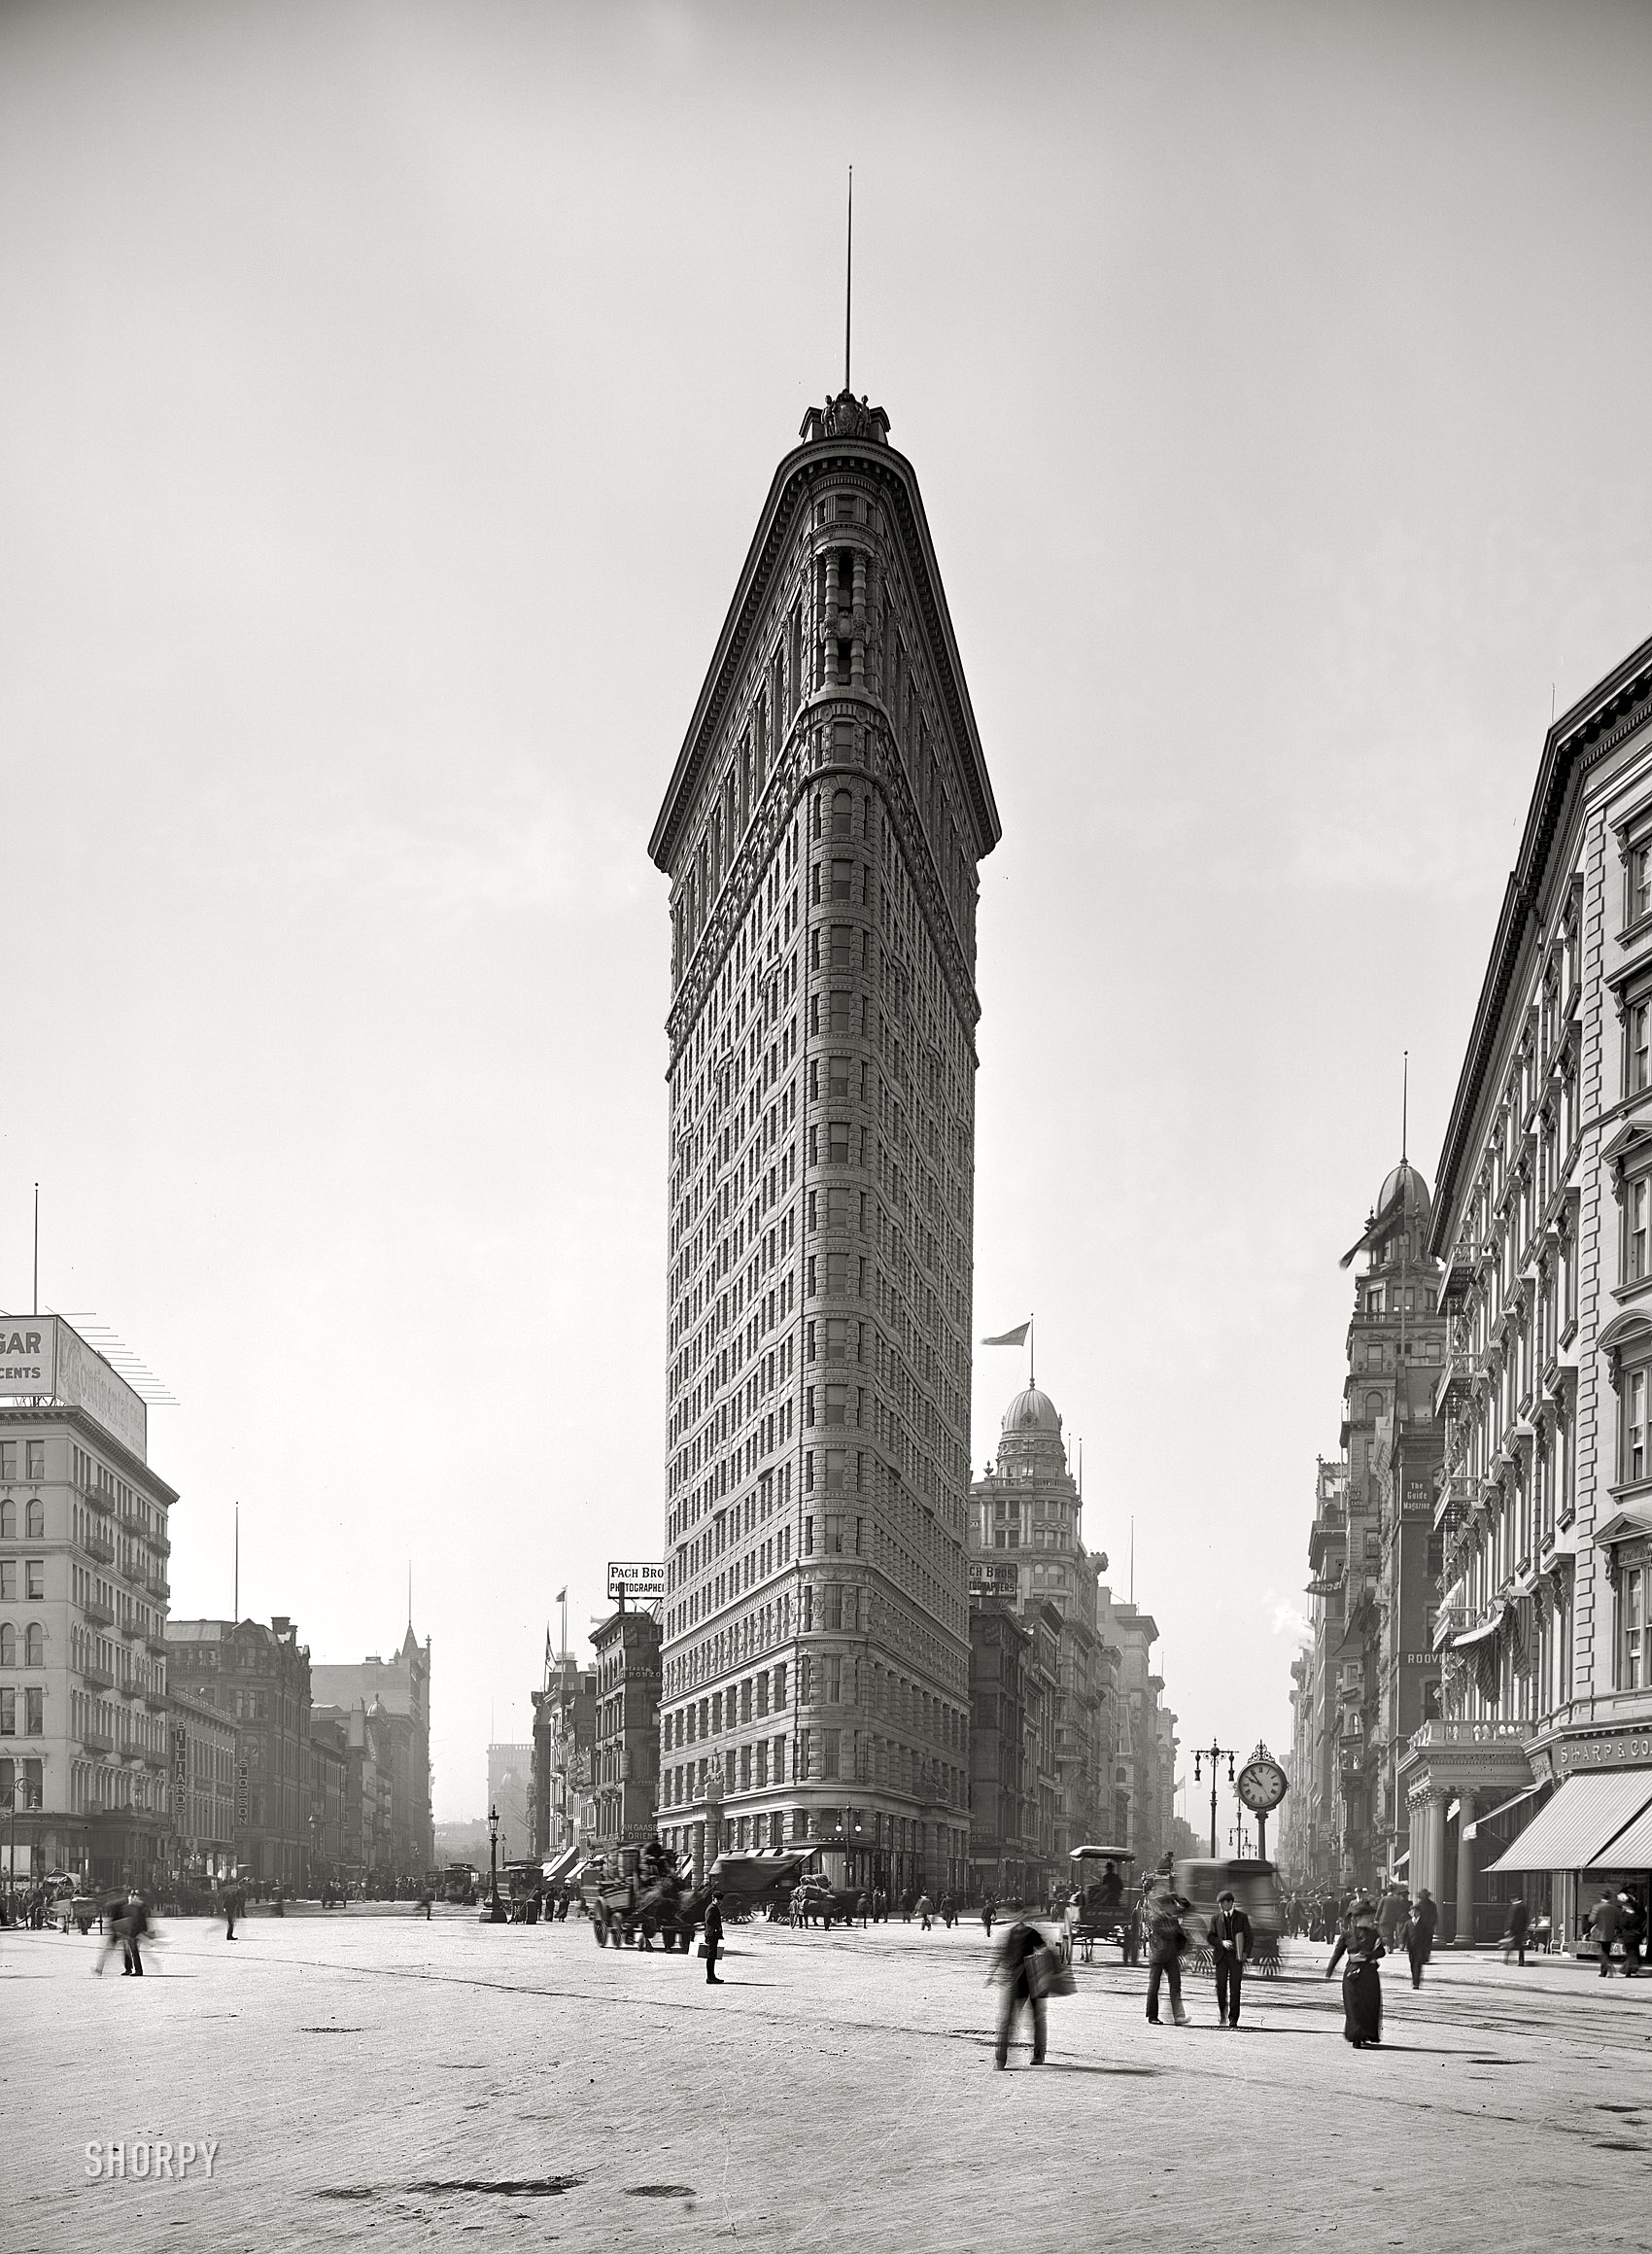 New York circa 1905. "The Flatiron building." The iconic proto-skyscraper early in its life. Detroit Publishing Company glass negative. View full size.